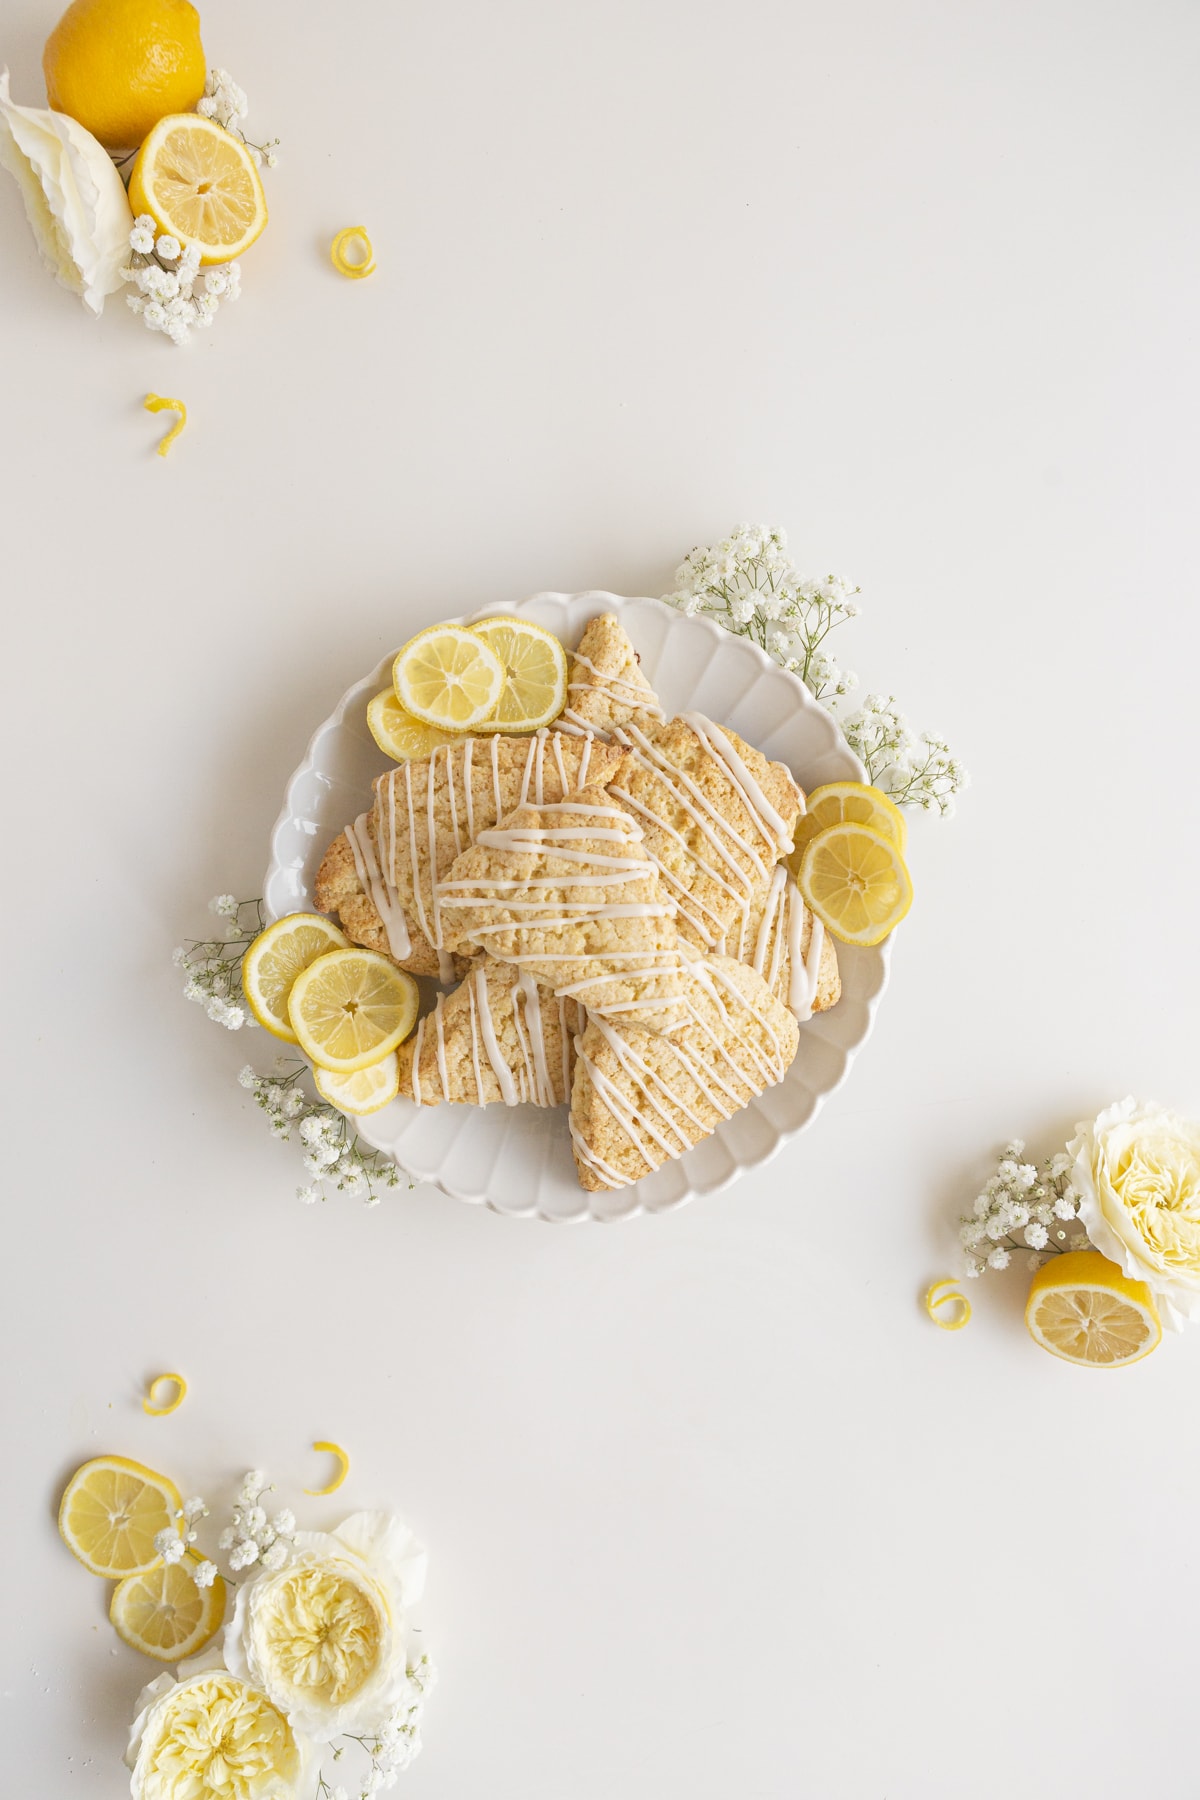 lemon scones with slices of lemon and flowers